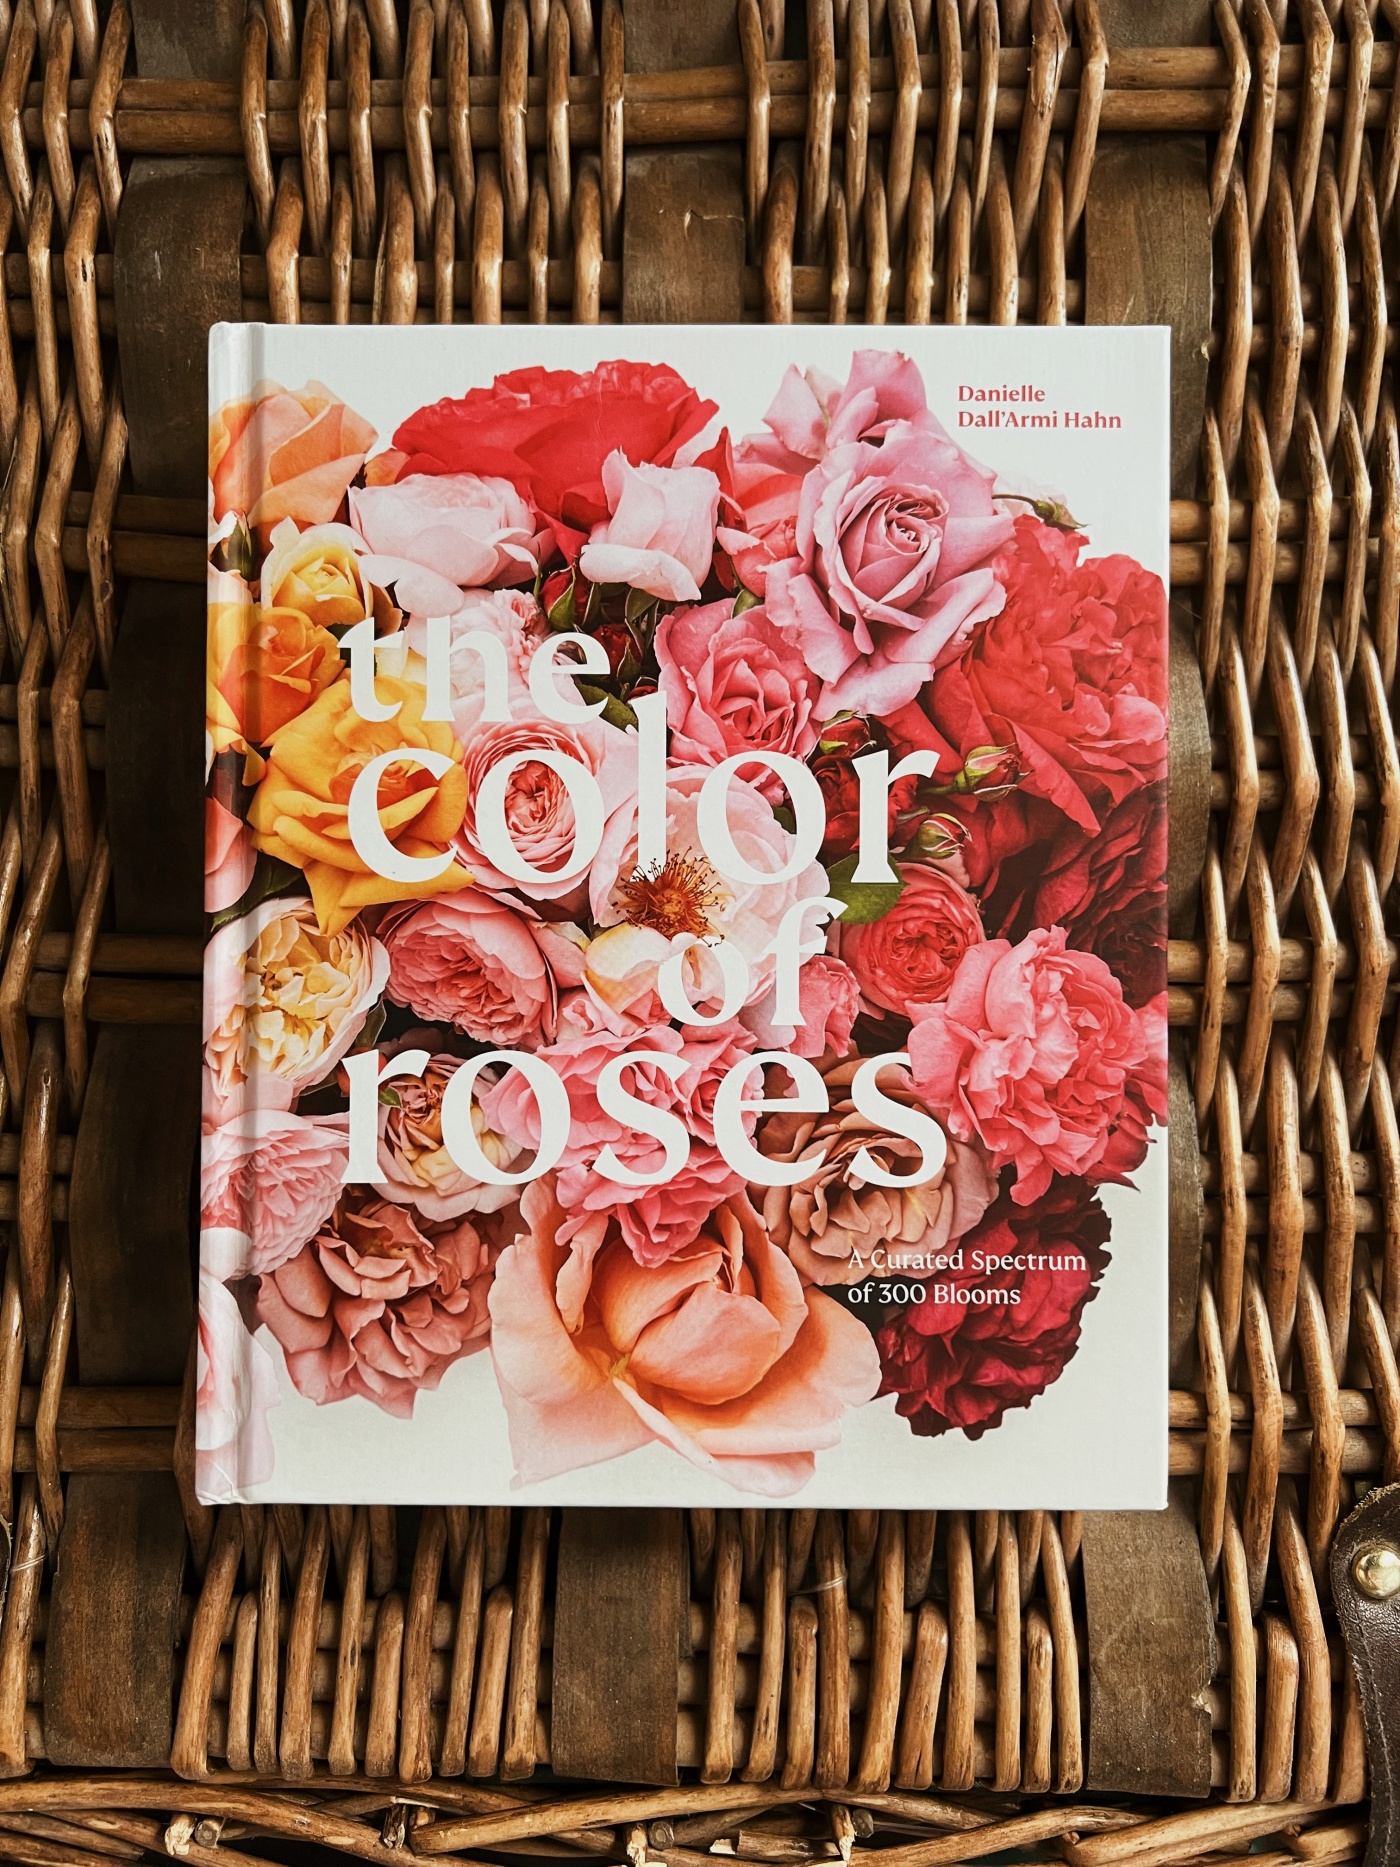 The Color of Roses - A Book Review and a Mother's Day Gift Idea.